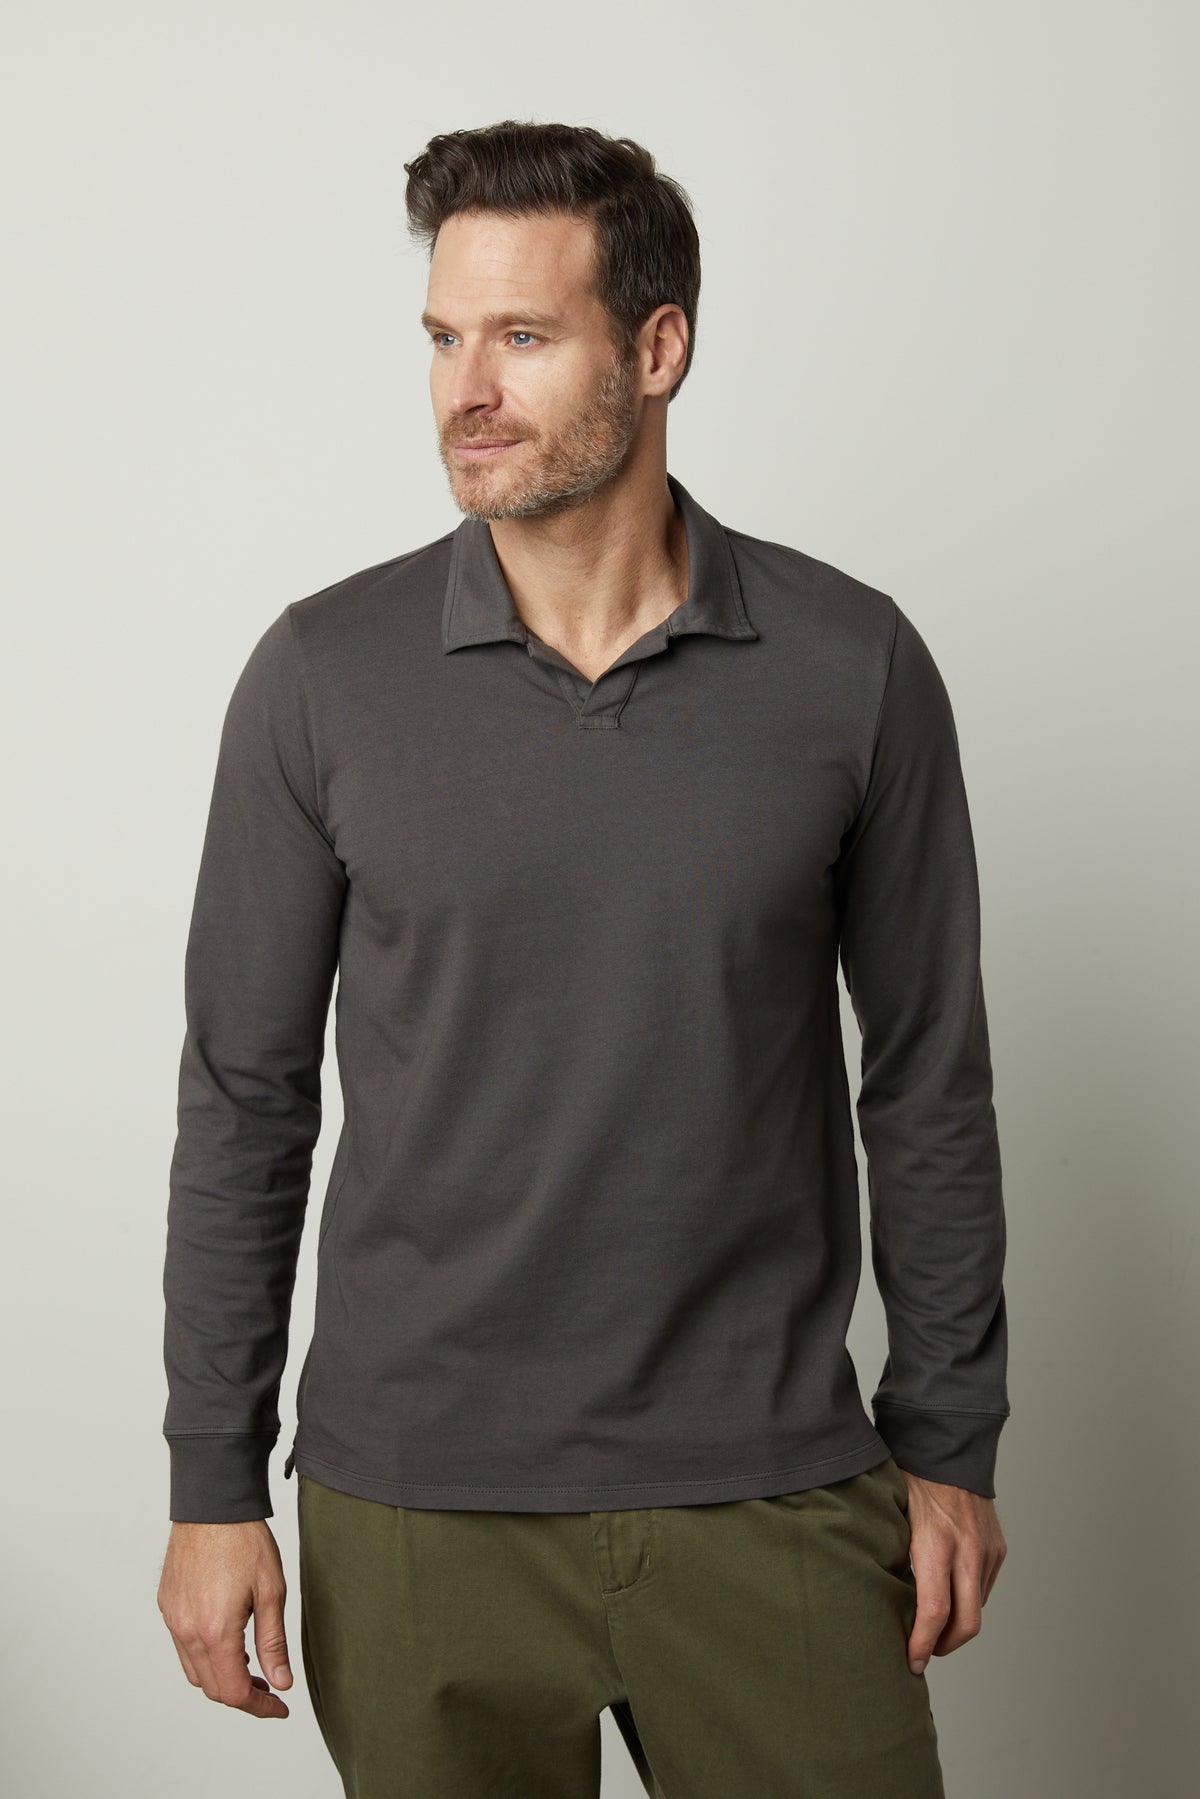 A man wearing a grey long sleeved KOLBE POLO shirt by Velvet by Graham & Spencer.-26827672027329